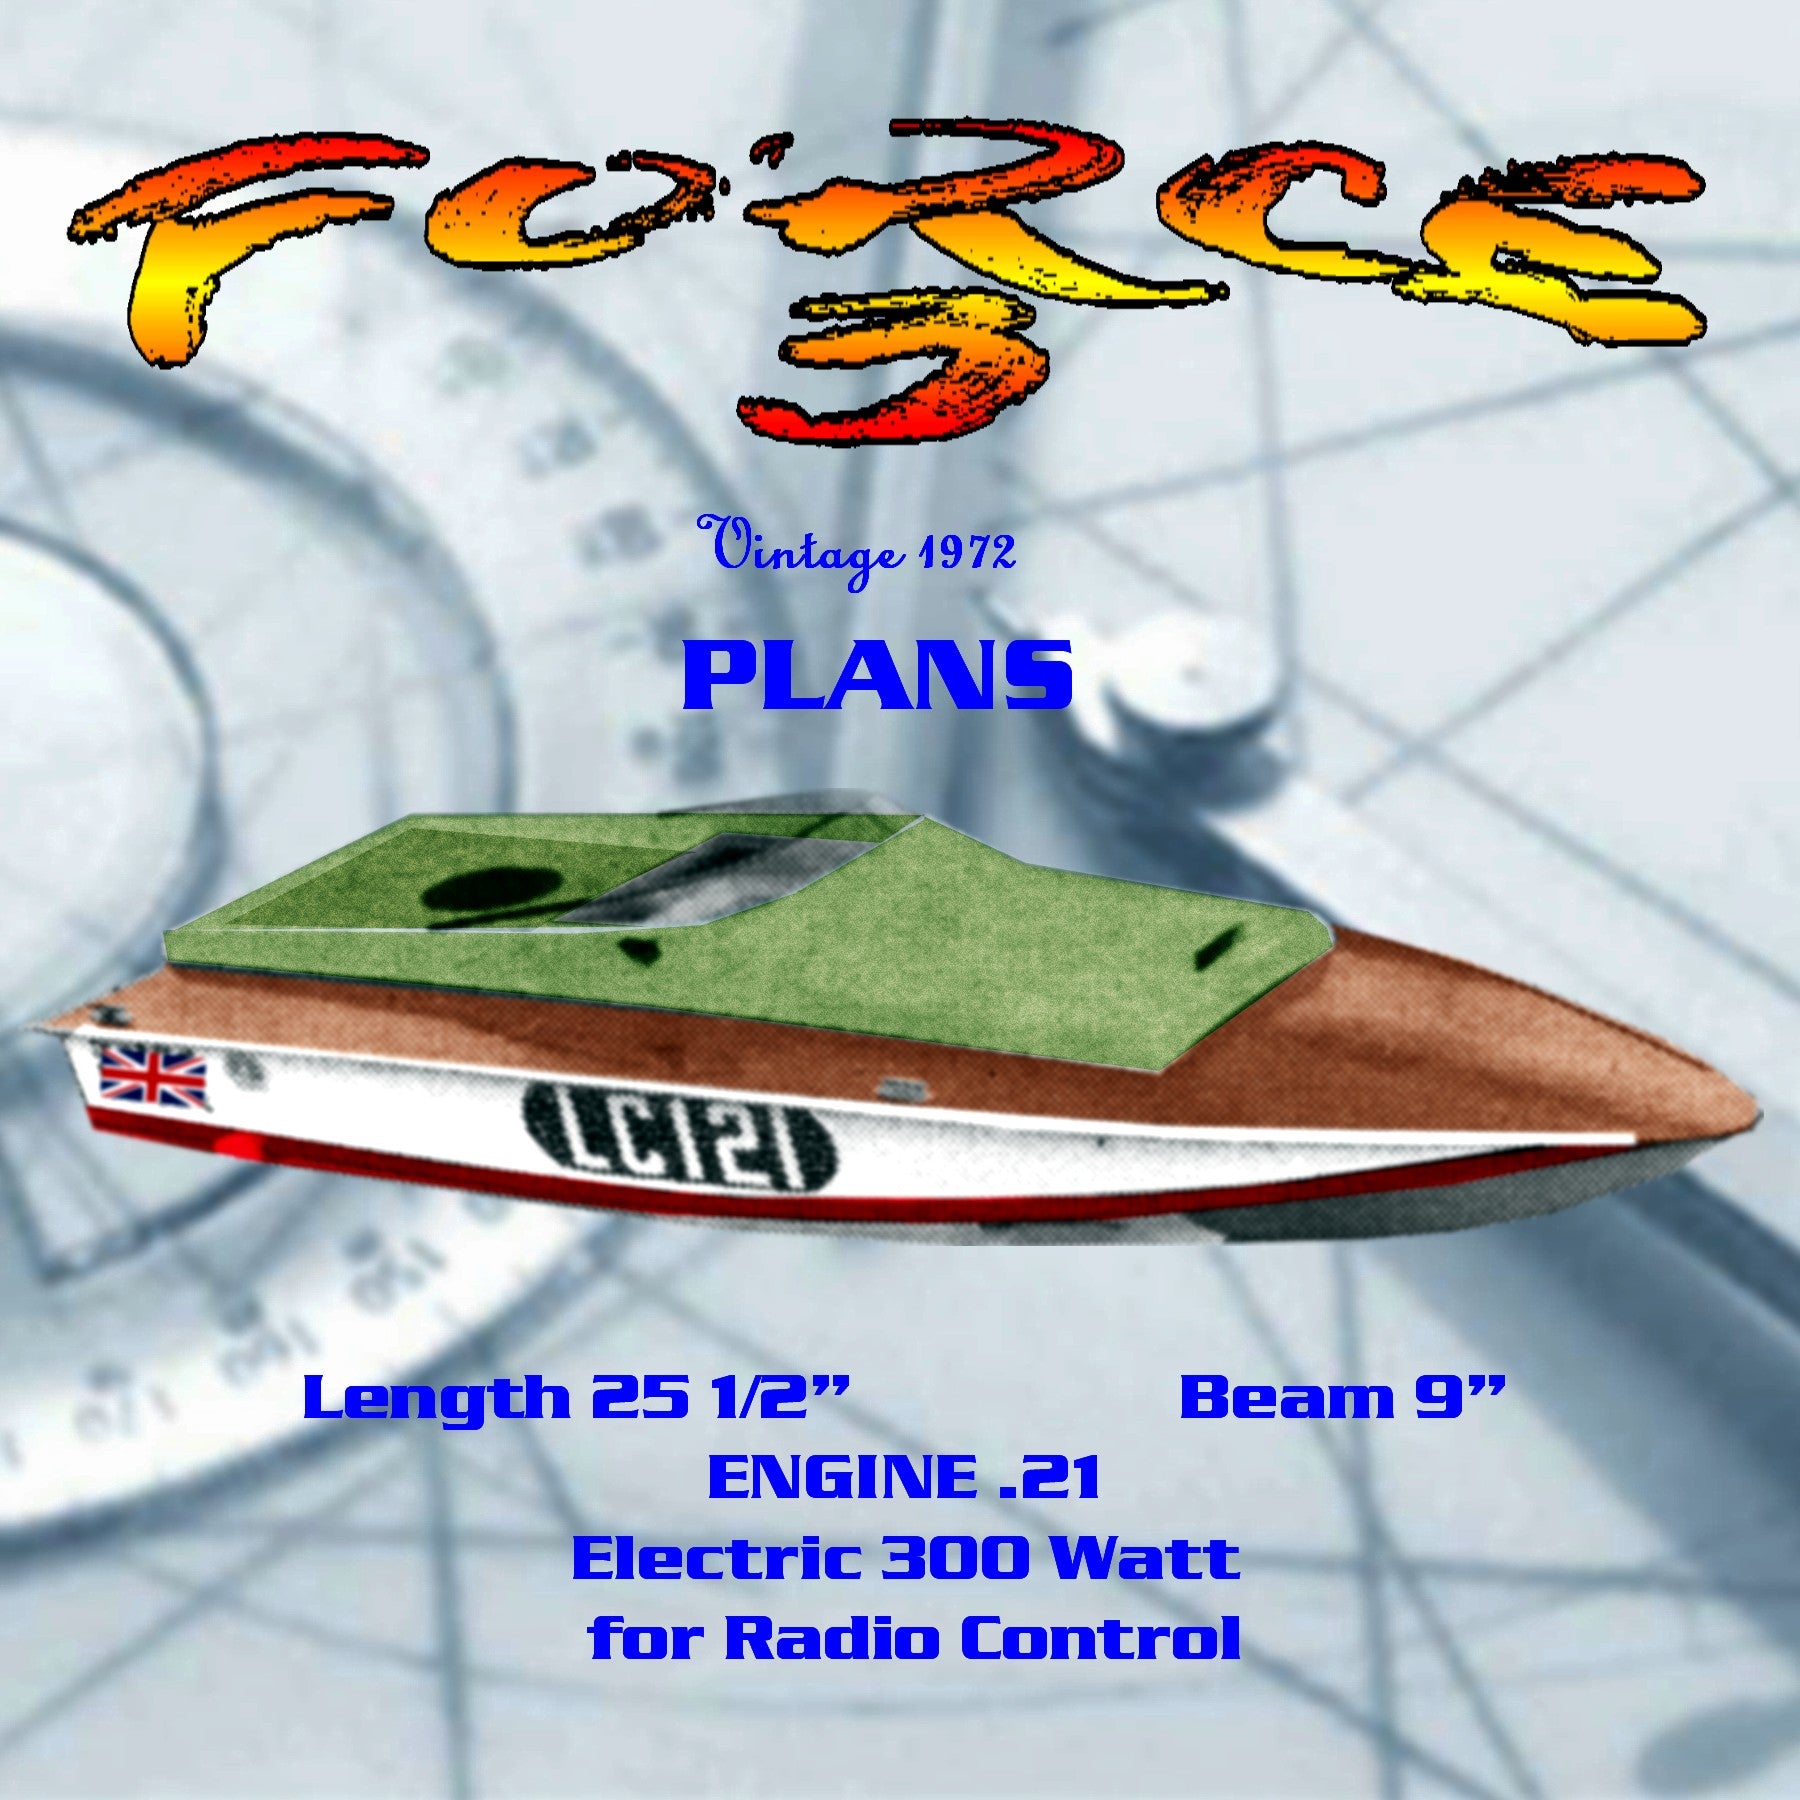 full size printed plan semi-scale off shore powerboat for radio control